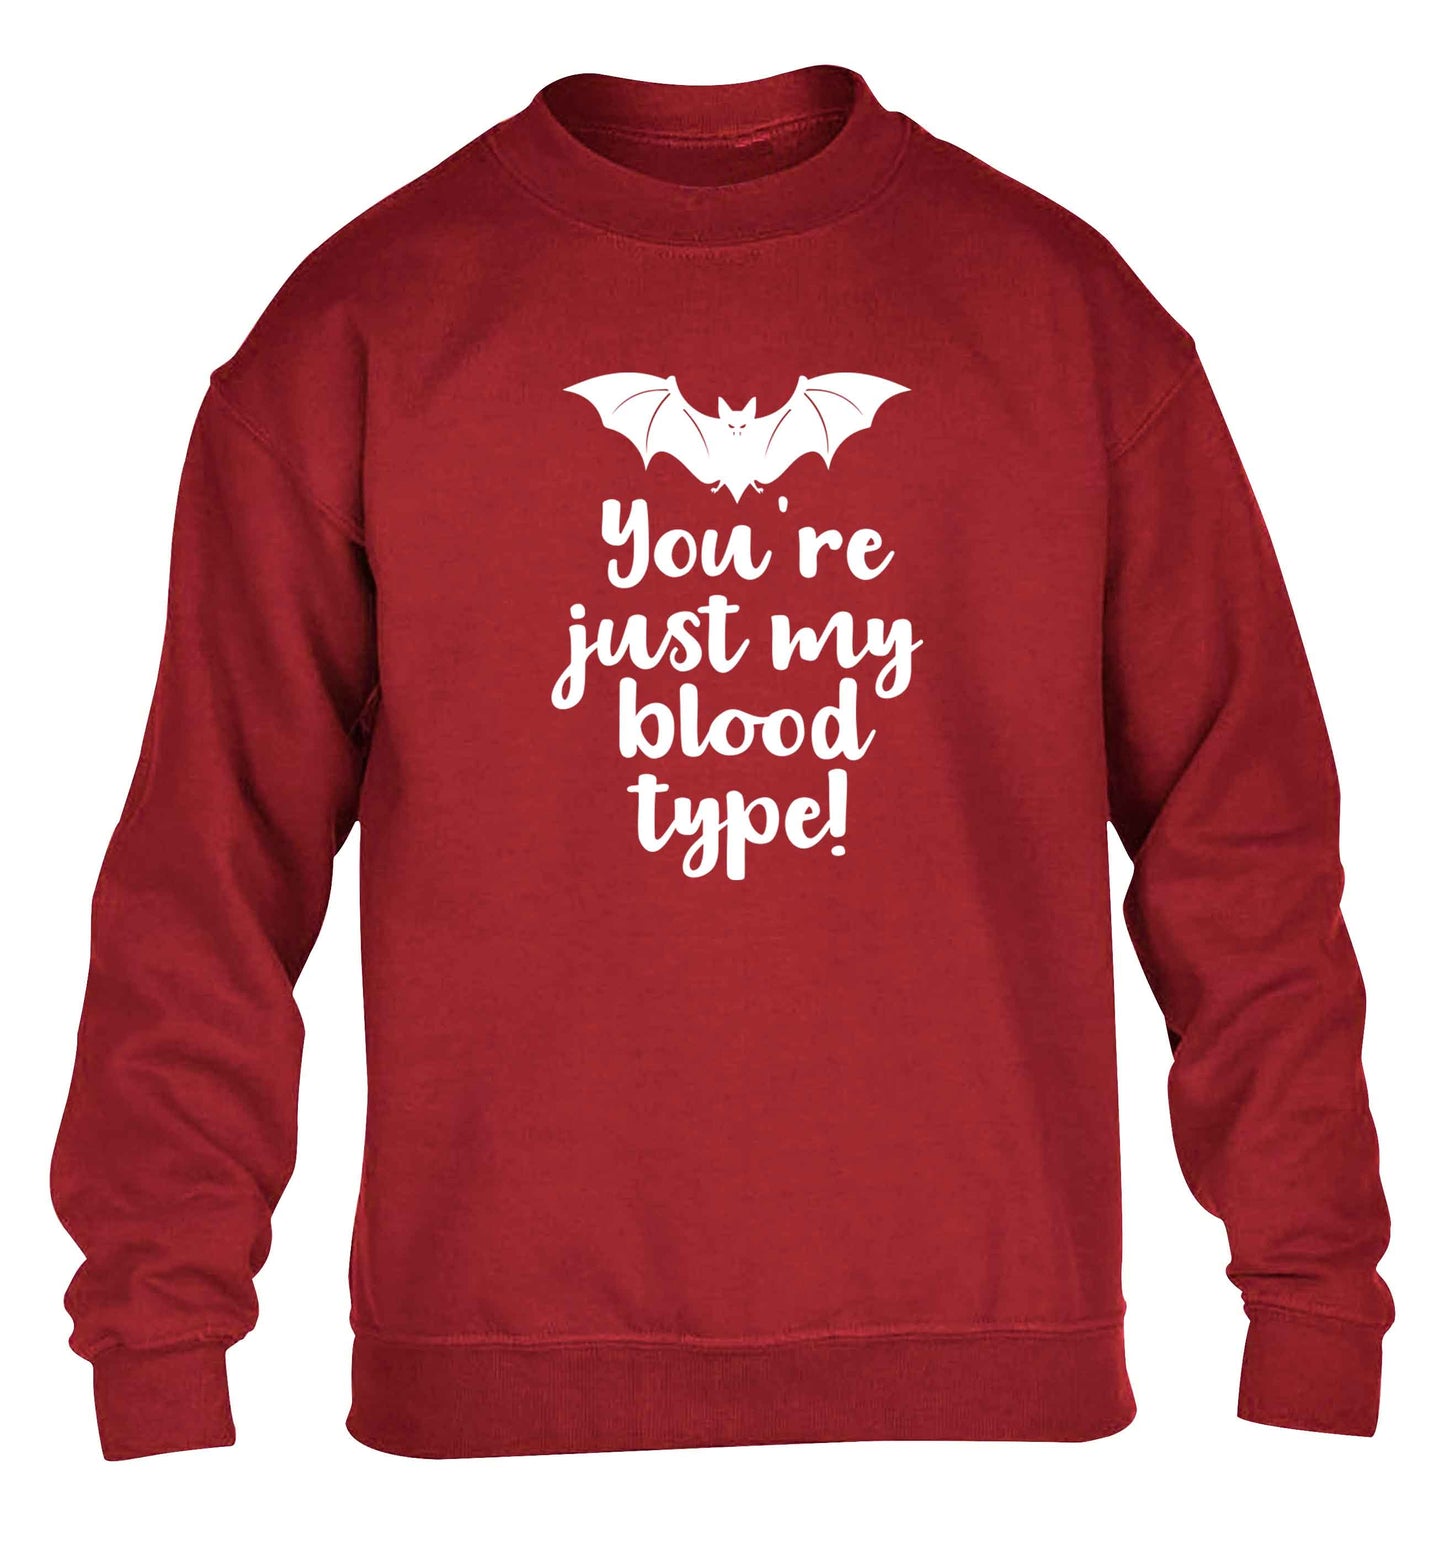 You're just my blood type children's grey sweater 12-13 Years